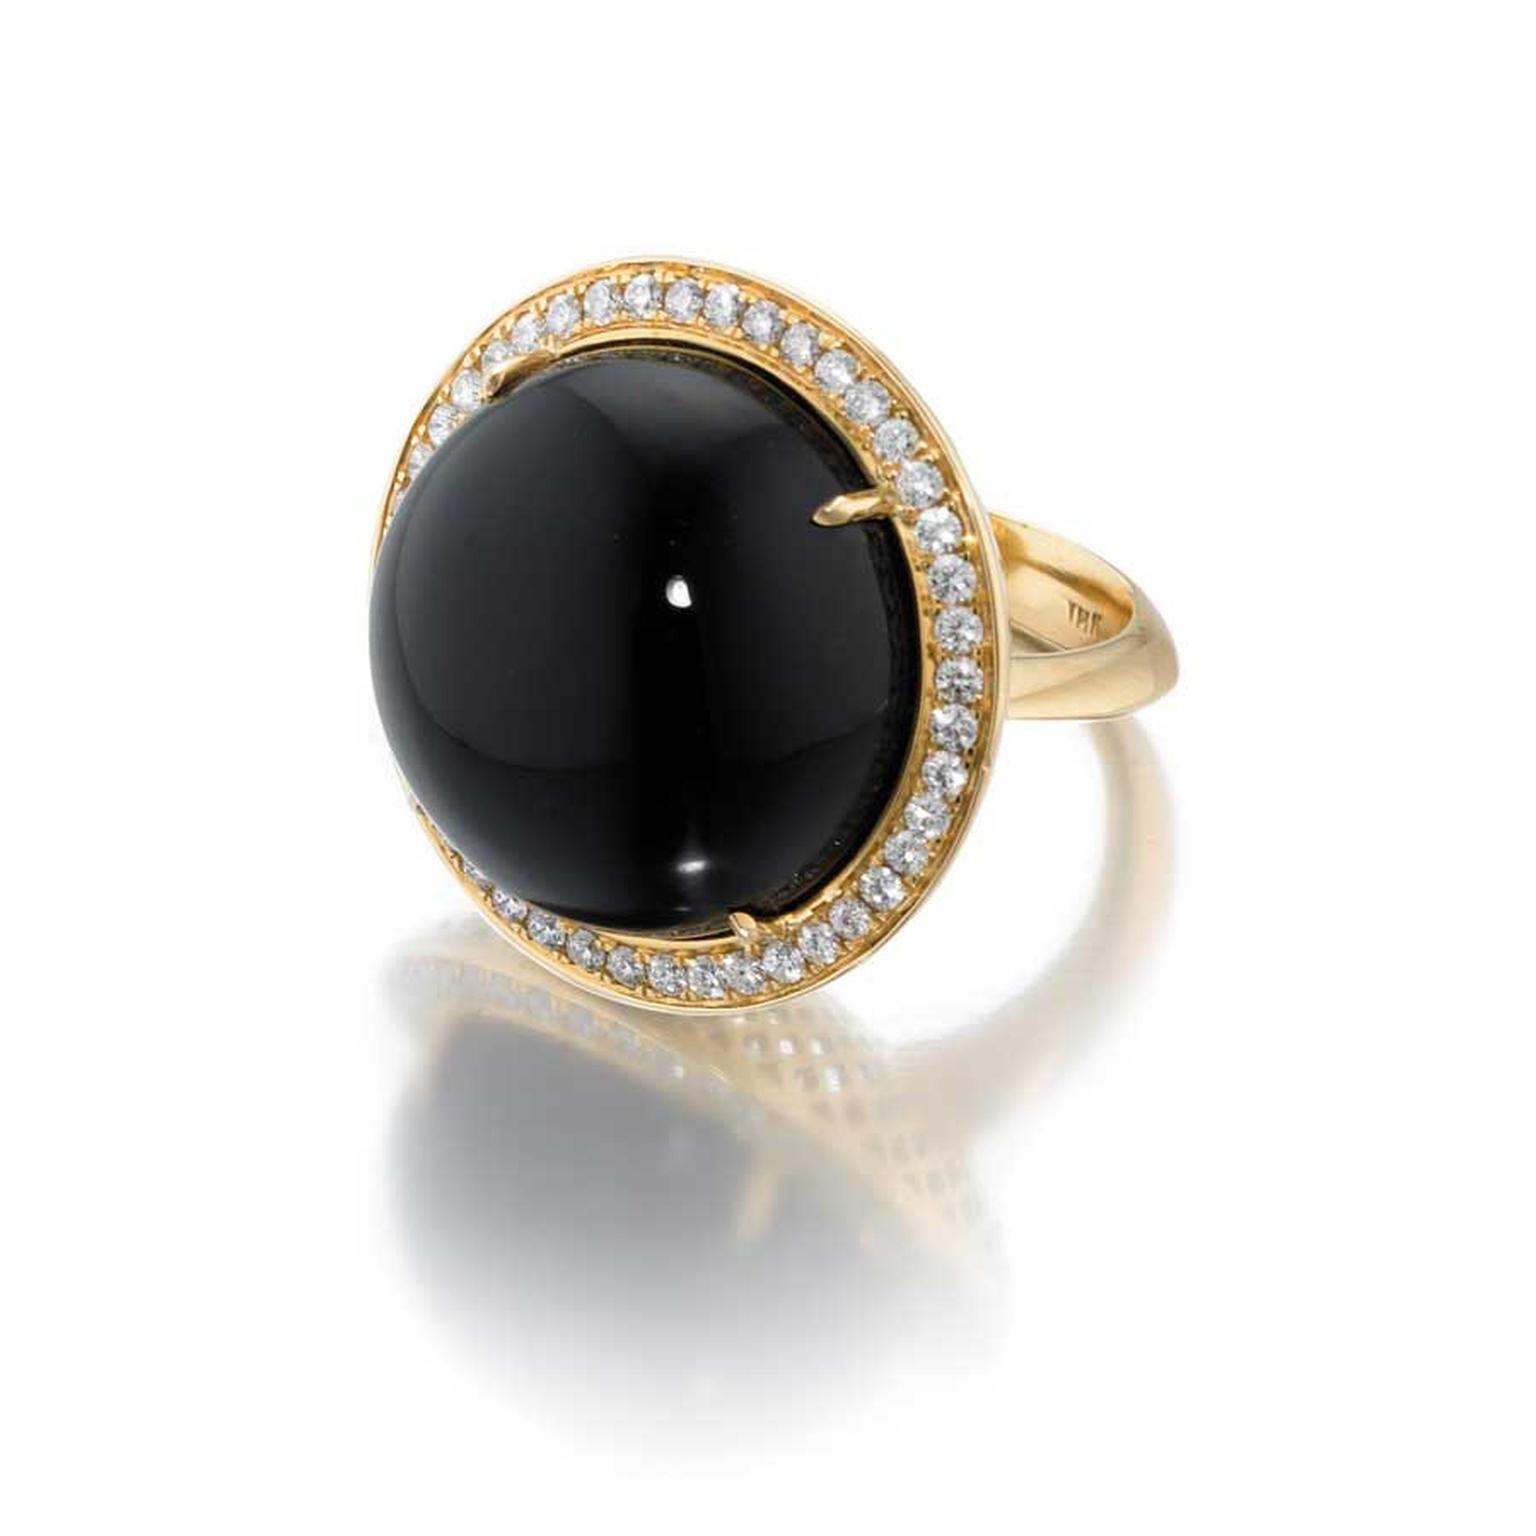 Ray Griffiths yellow gold ring with a central cabochon onyx, surrounded by pavé diamonds